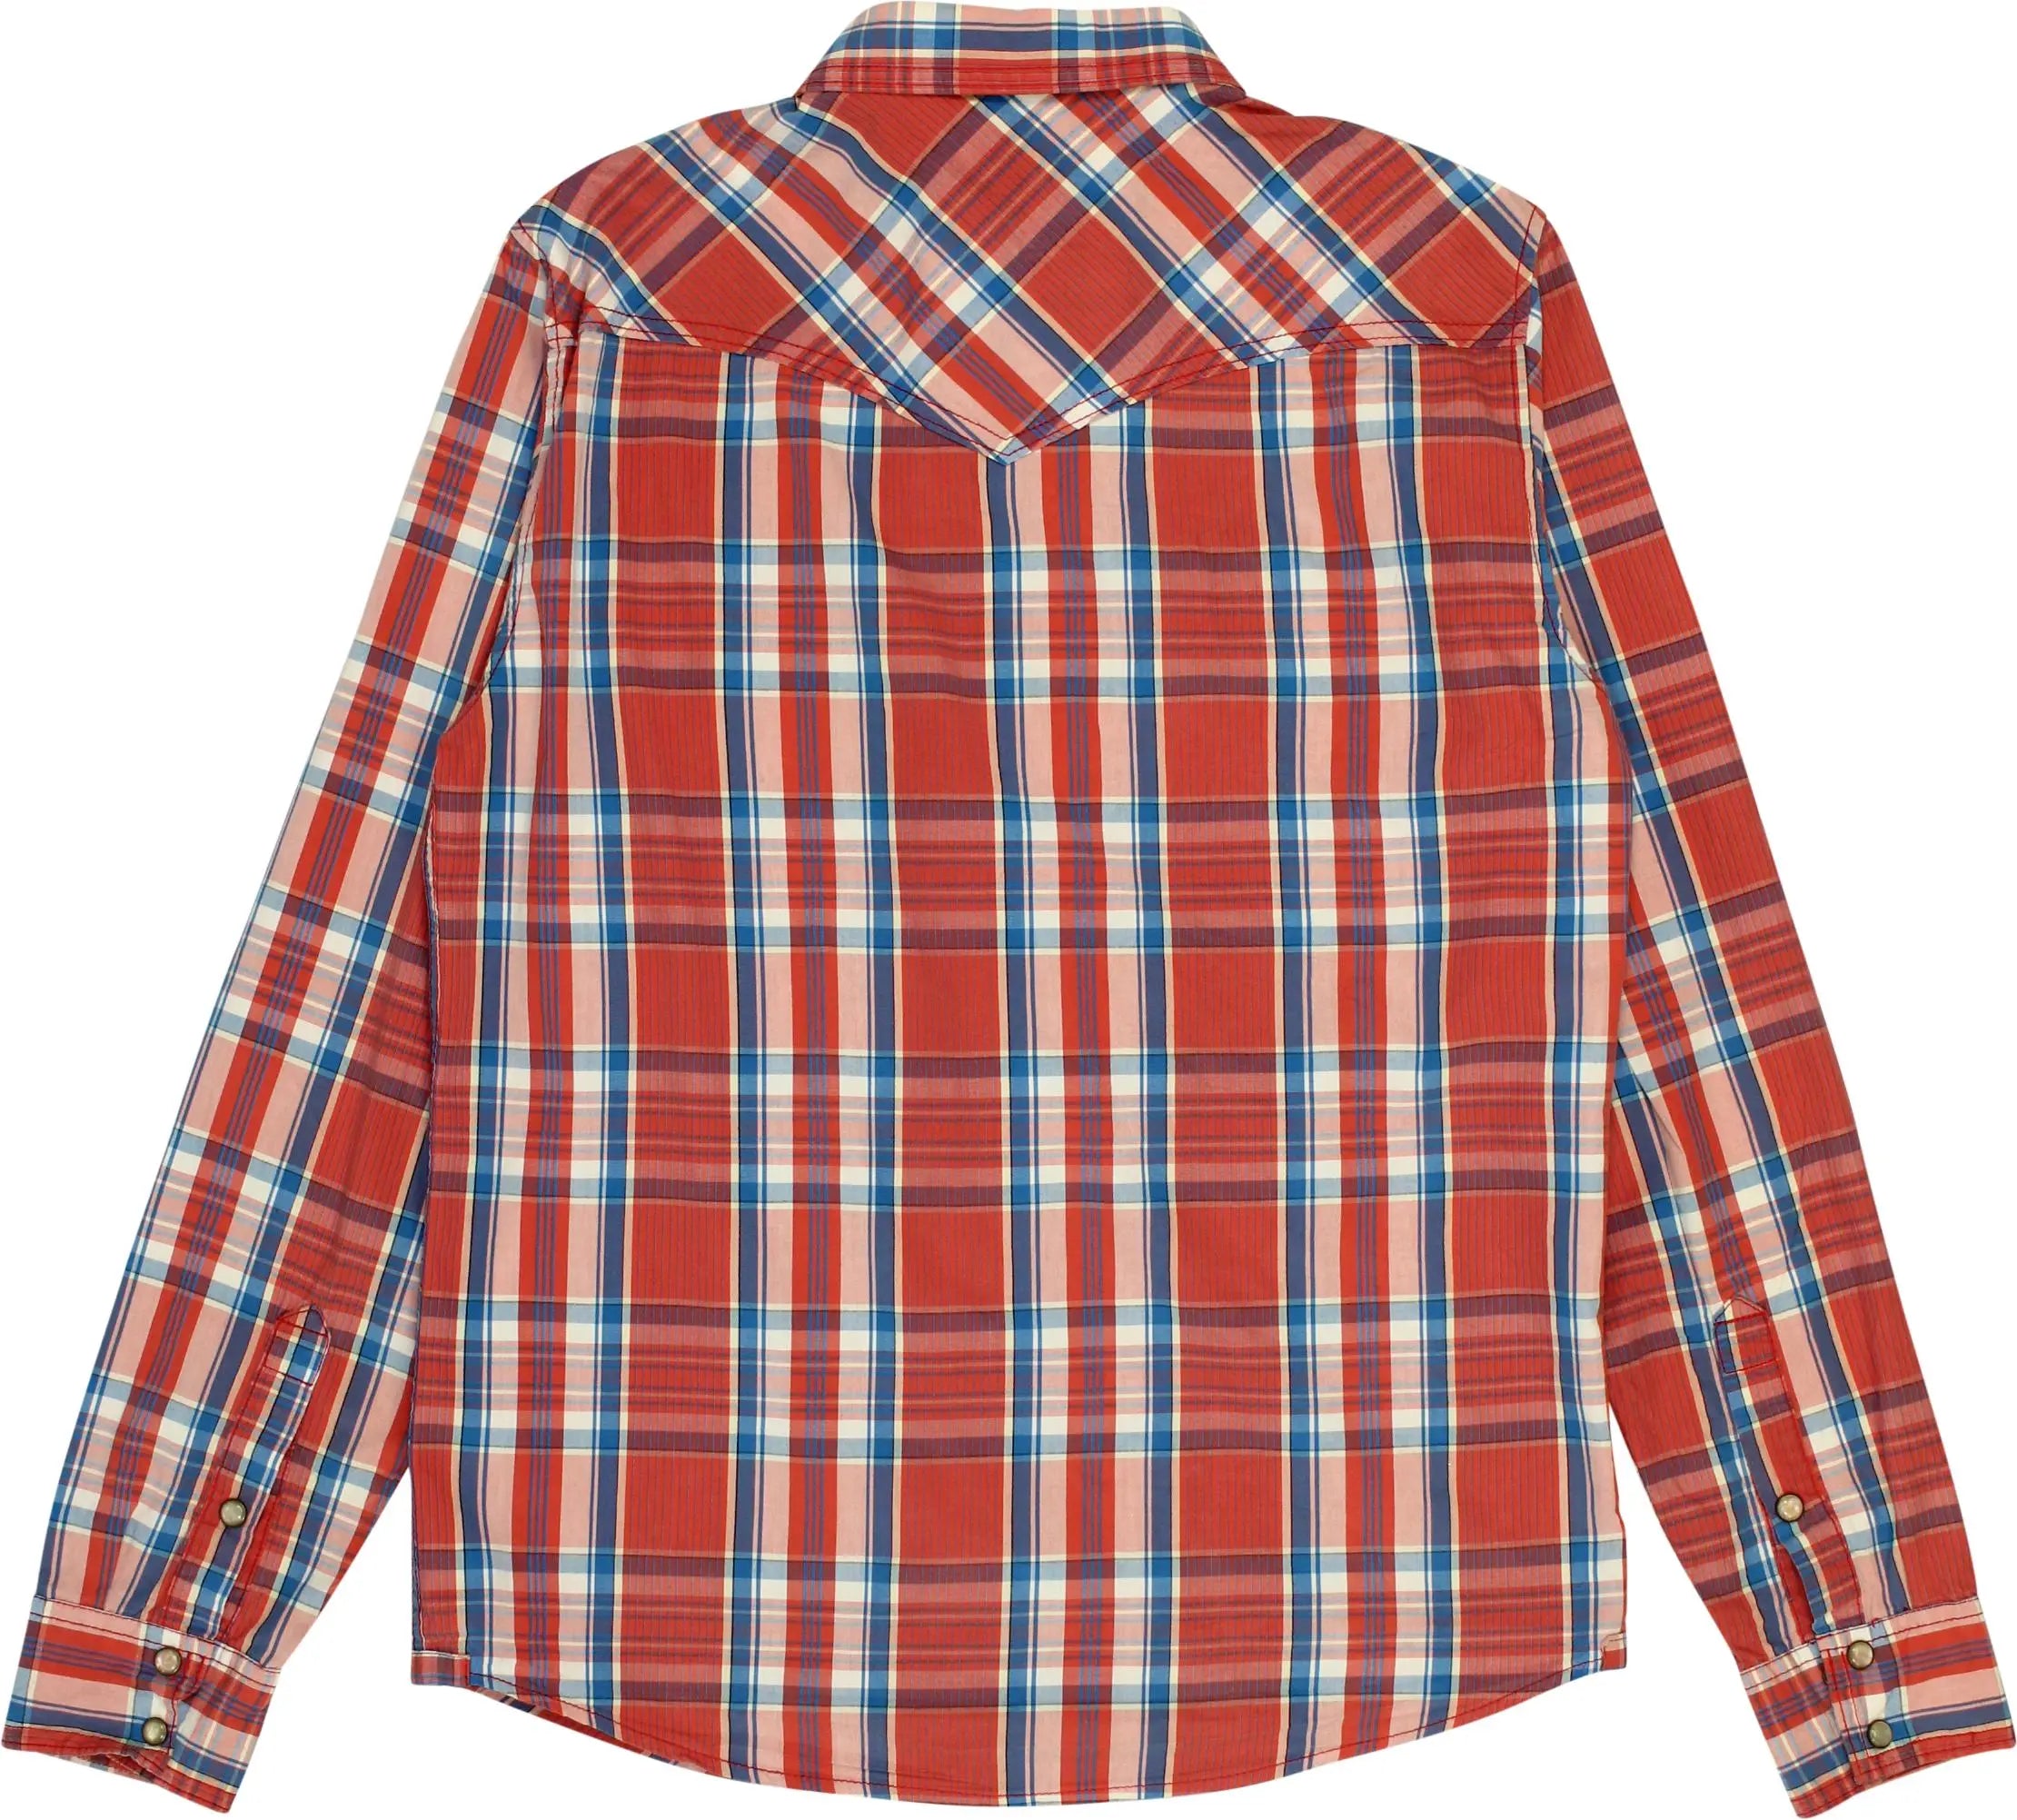 Aeropstale - Checked Shirt- ThriftTale.com - Vintage and second handclothing